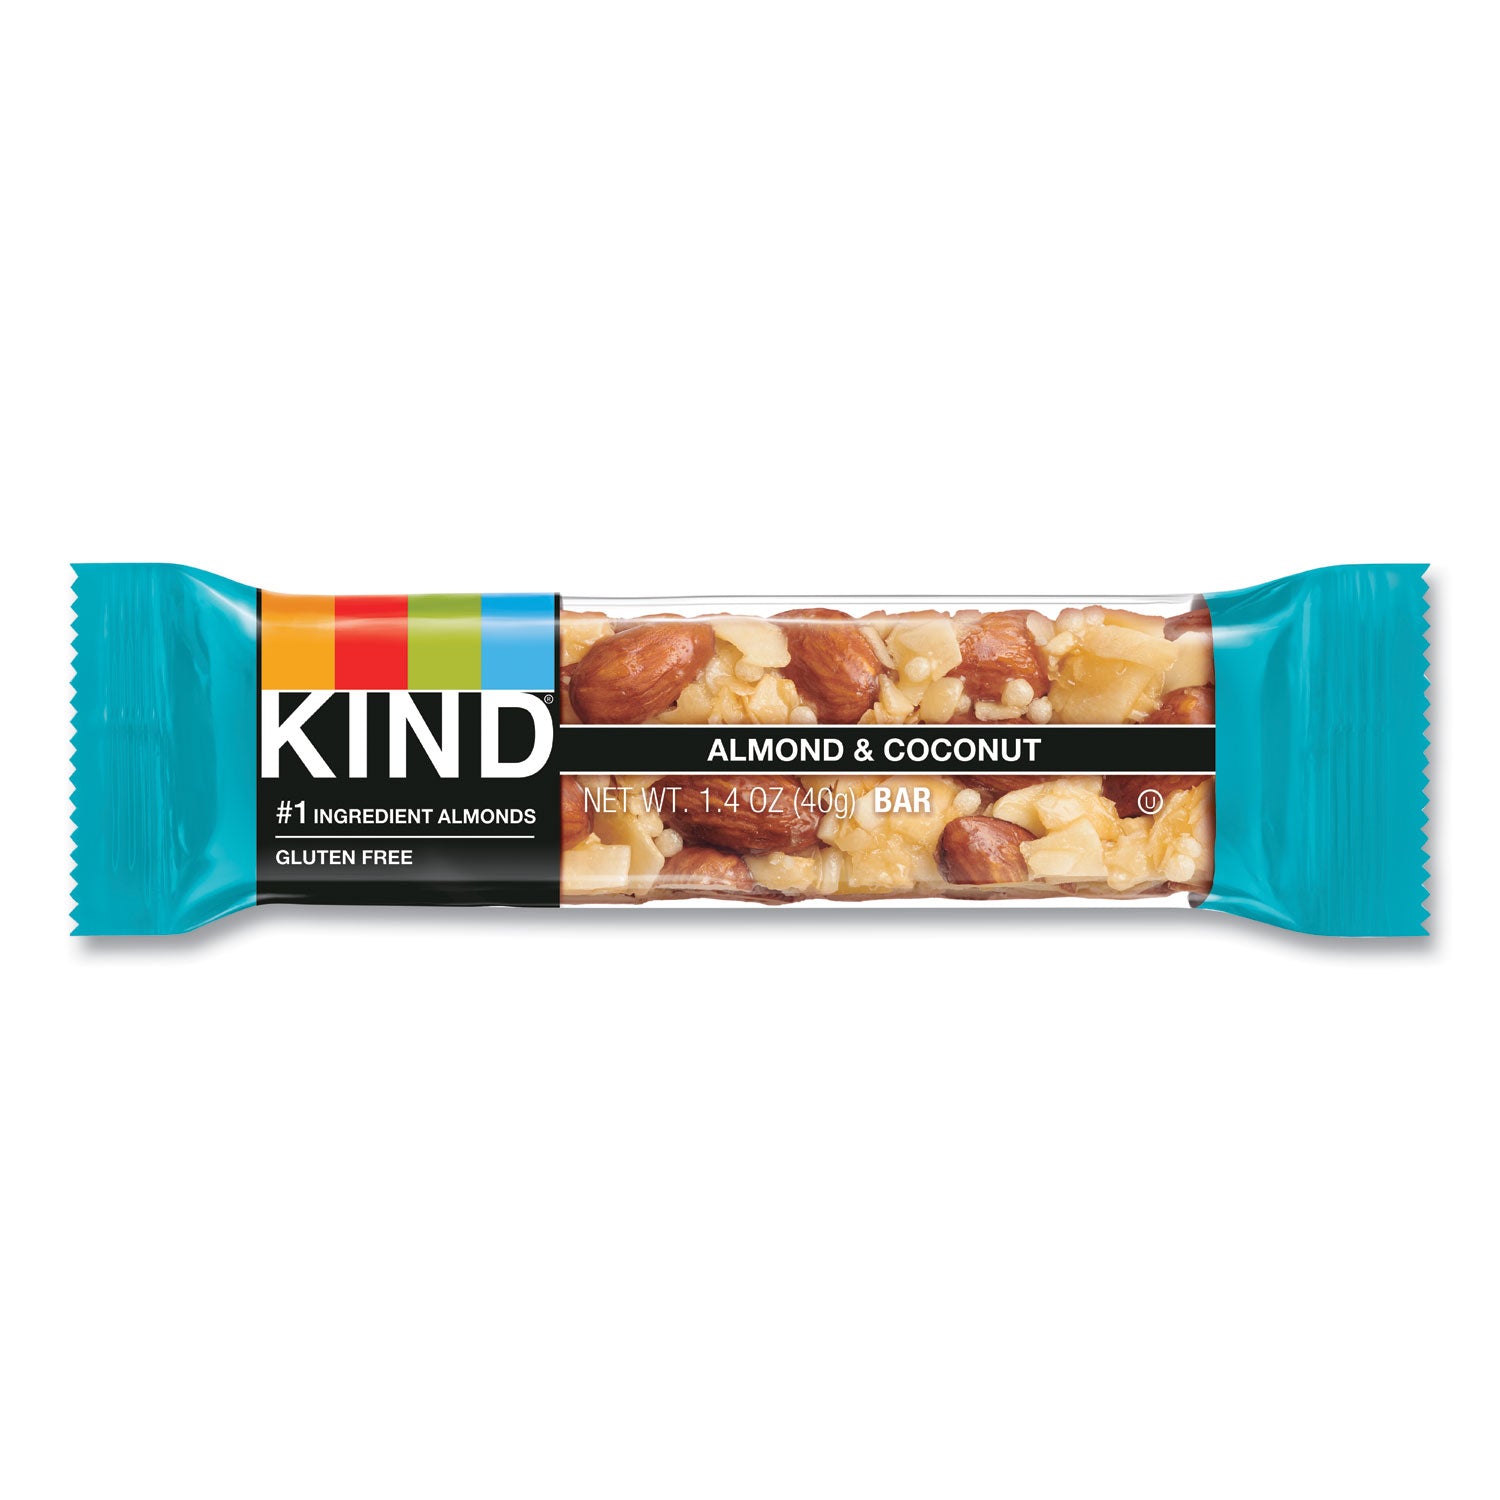 fruit-and-nut-bars-almond-and-coconut-14-oz-12-box_knd17828 - 2